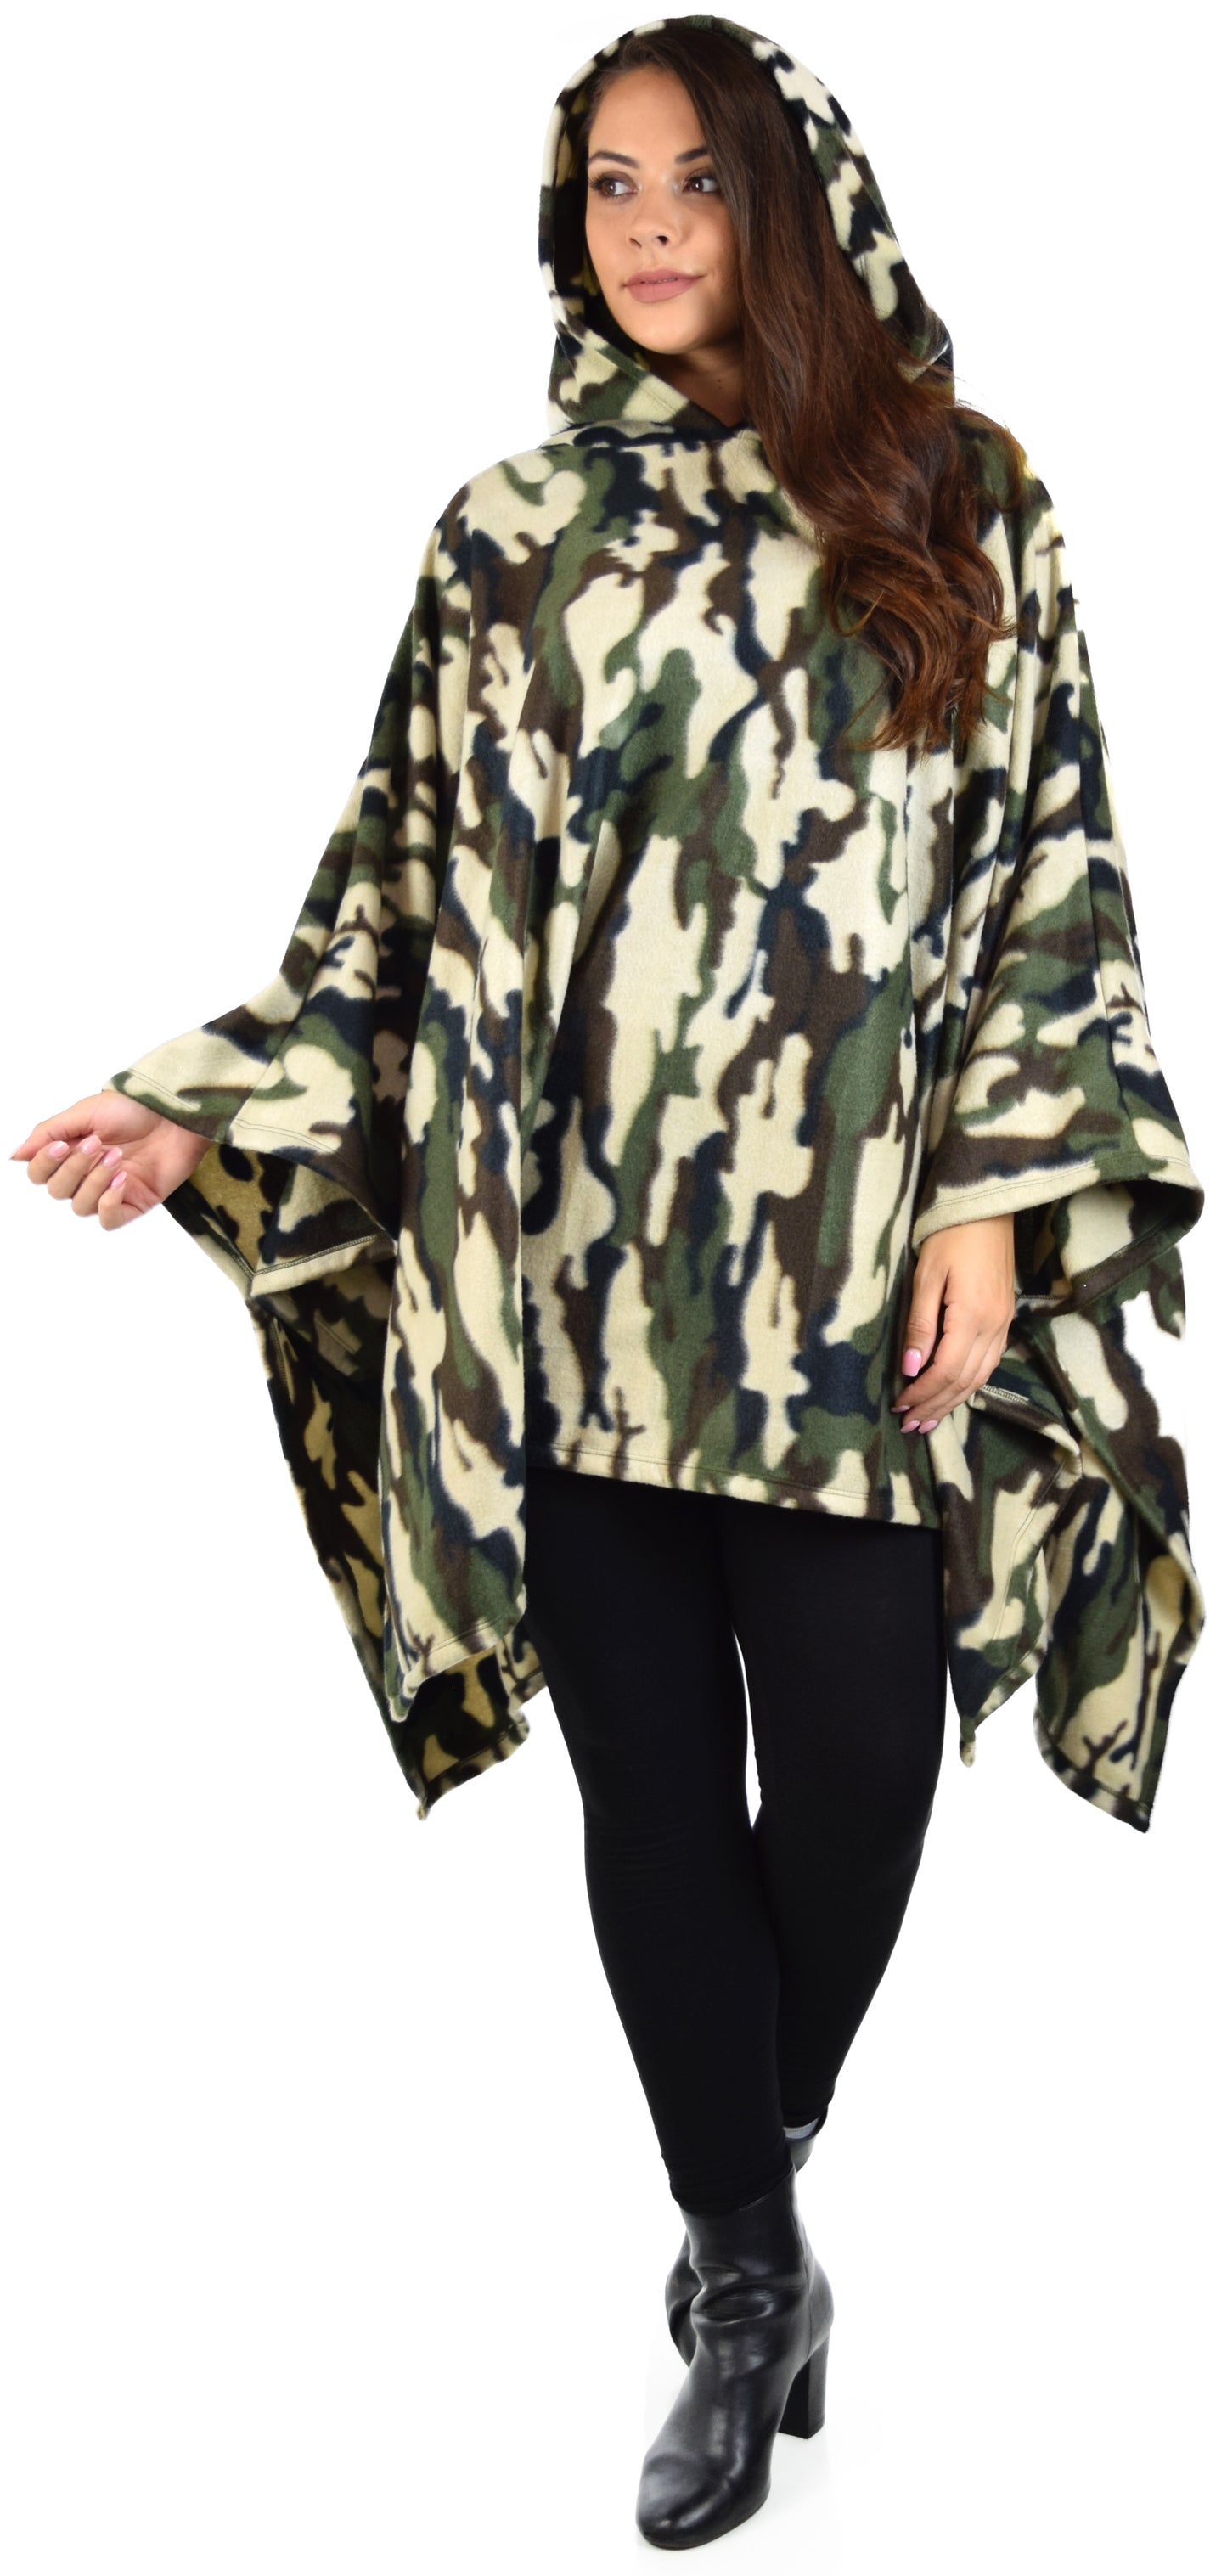 Full Size Poncho, Warm Poncho,Hooded Poncho, Fleece Poncho, Plus Size Poncho in warm and cozy Fleece fabric fits up to 5xl